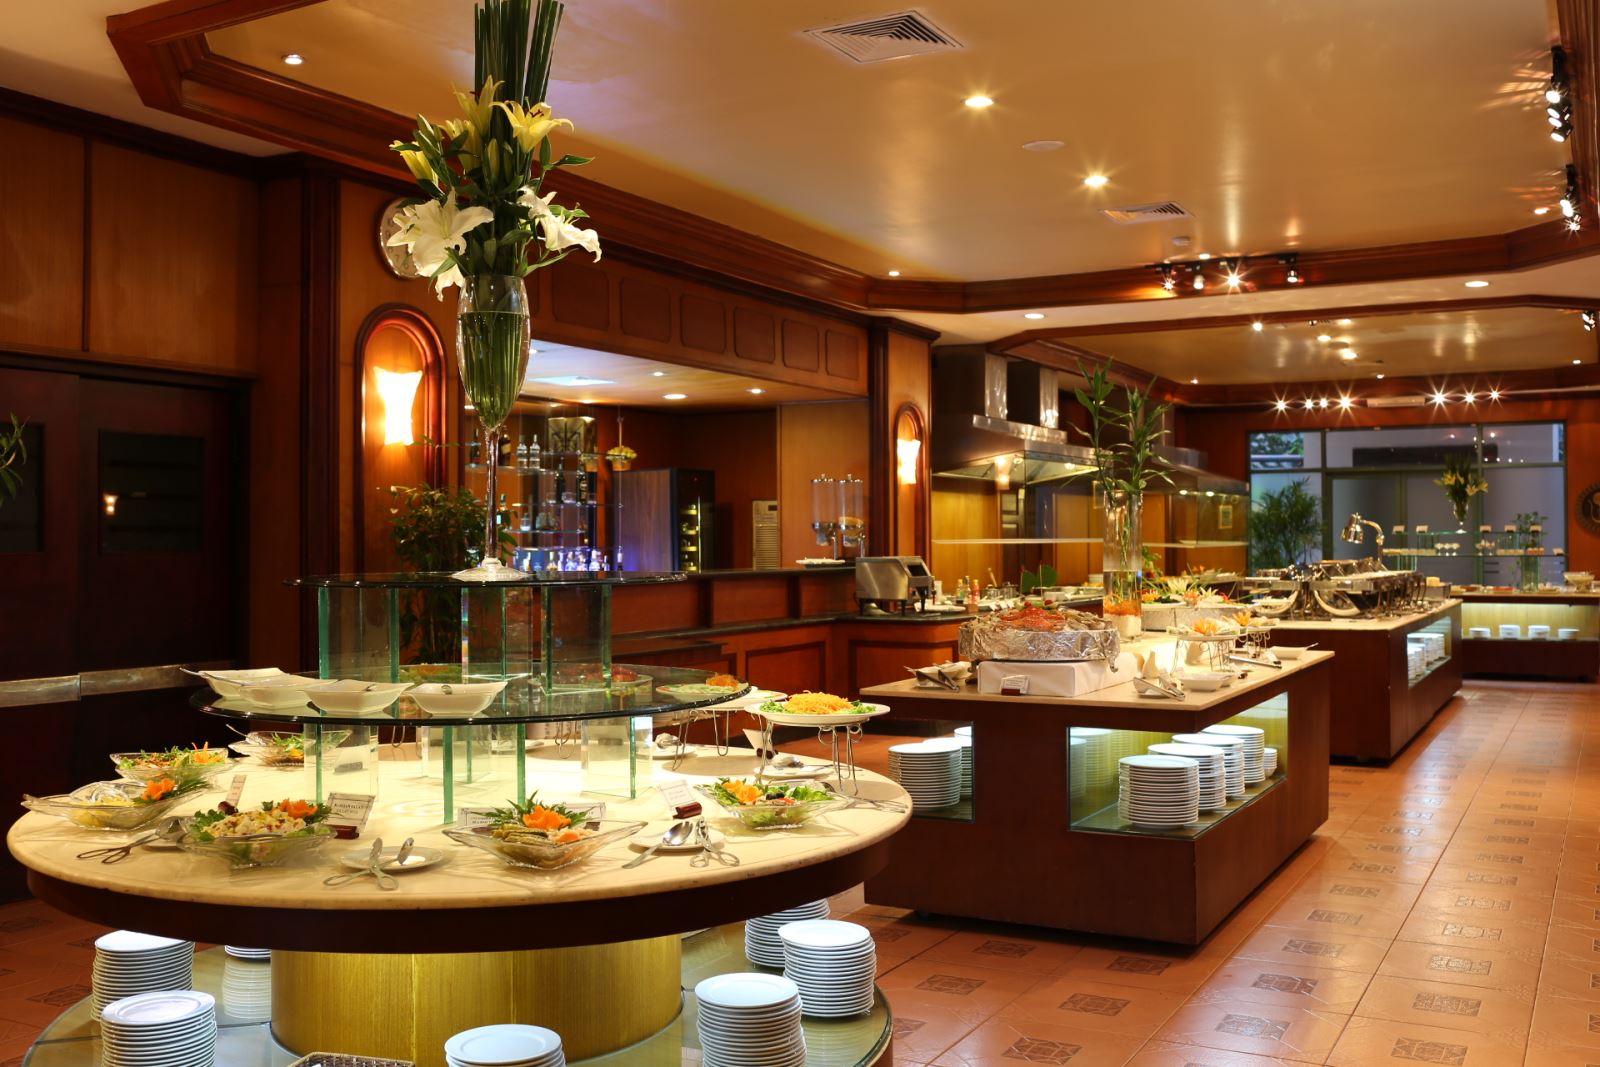 The luxury restaurant in Halong Plaza